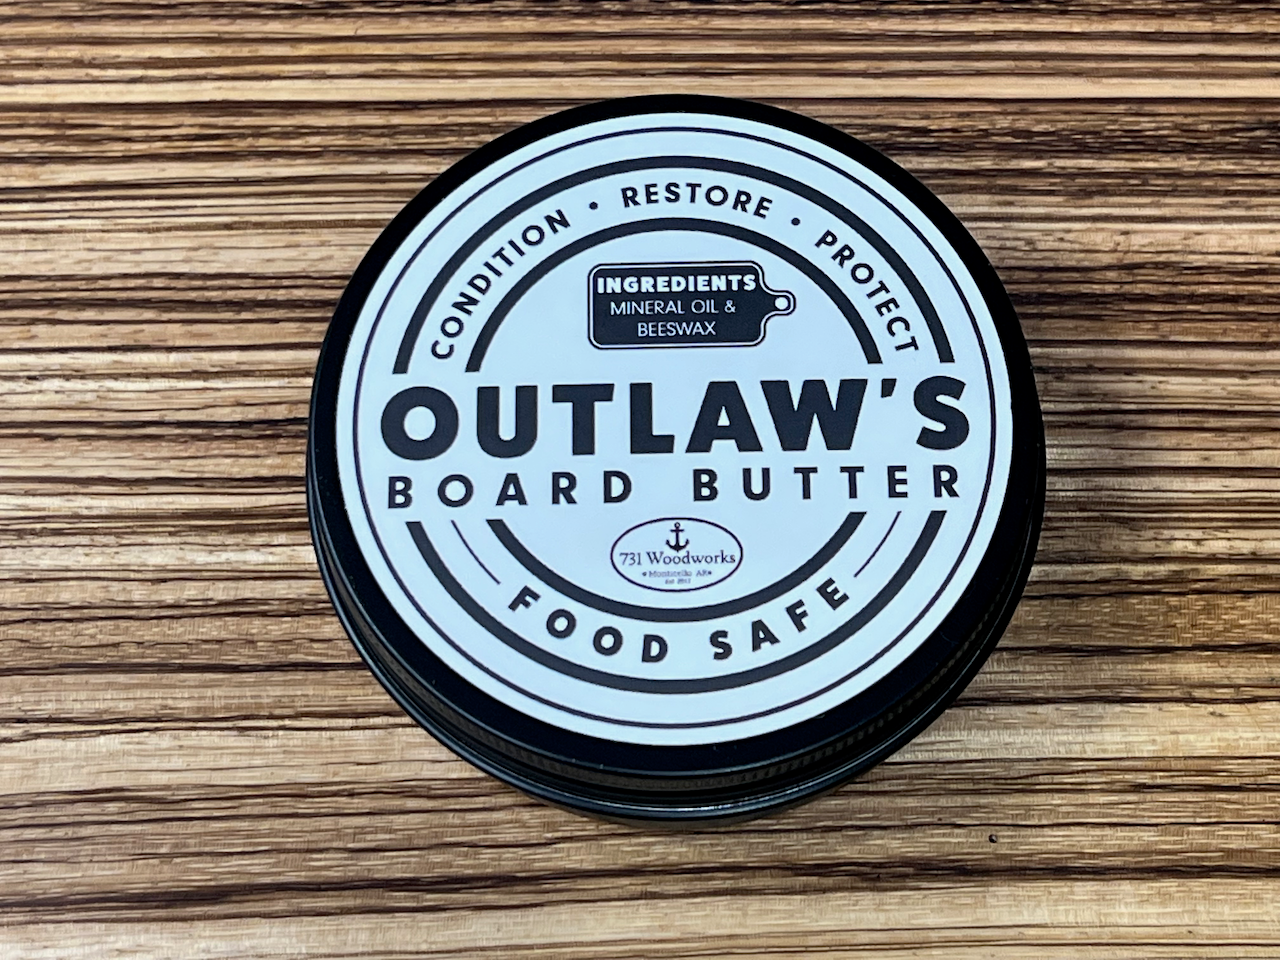 Cutting Board Conditioner Aka Board Butter Food Safe Beeswax -  Norway